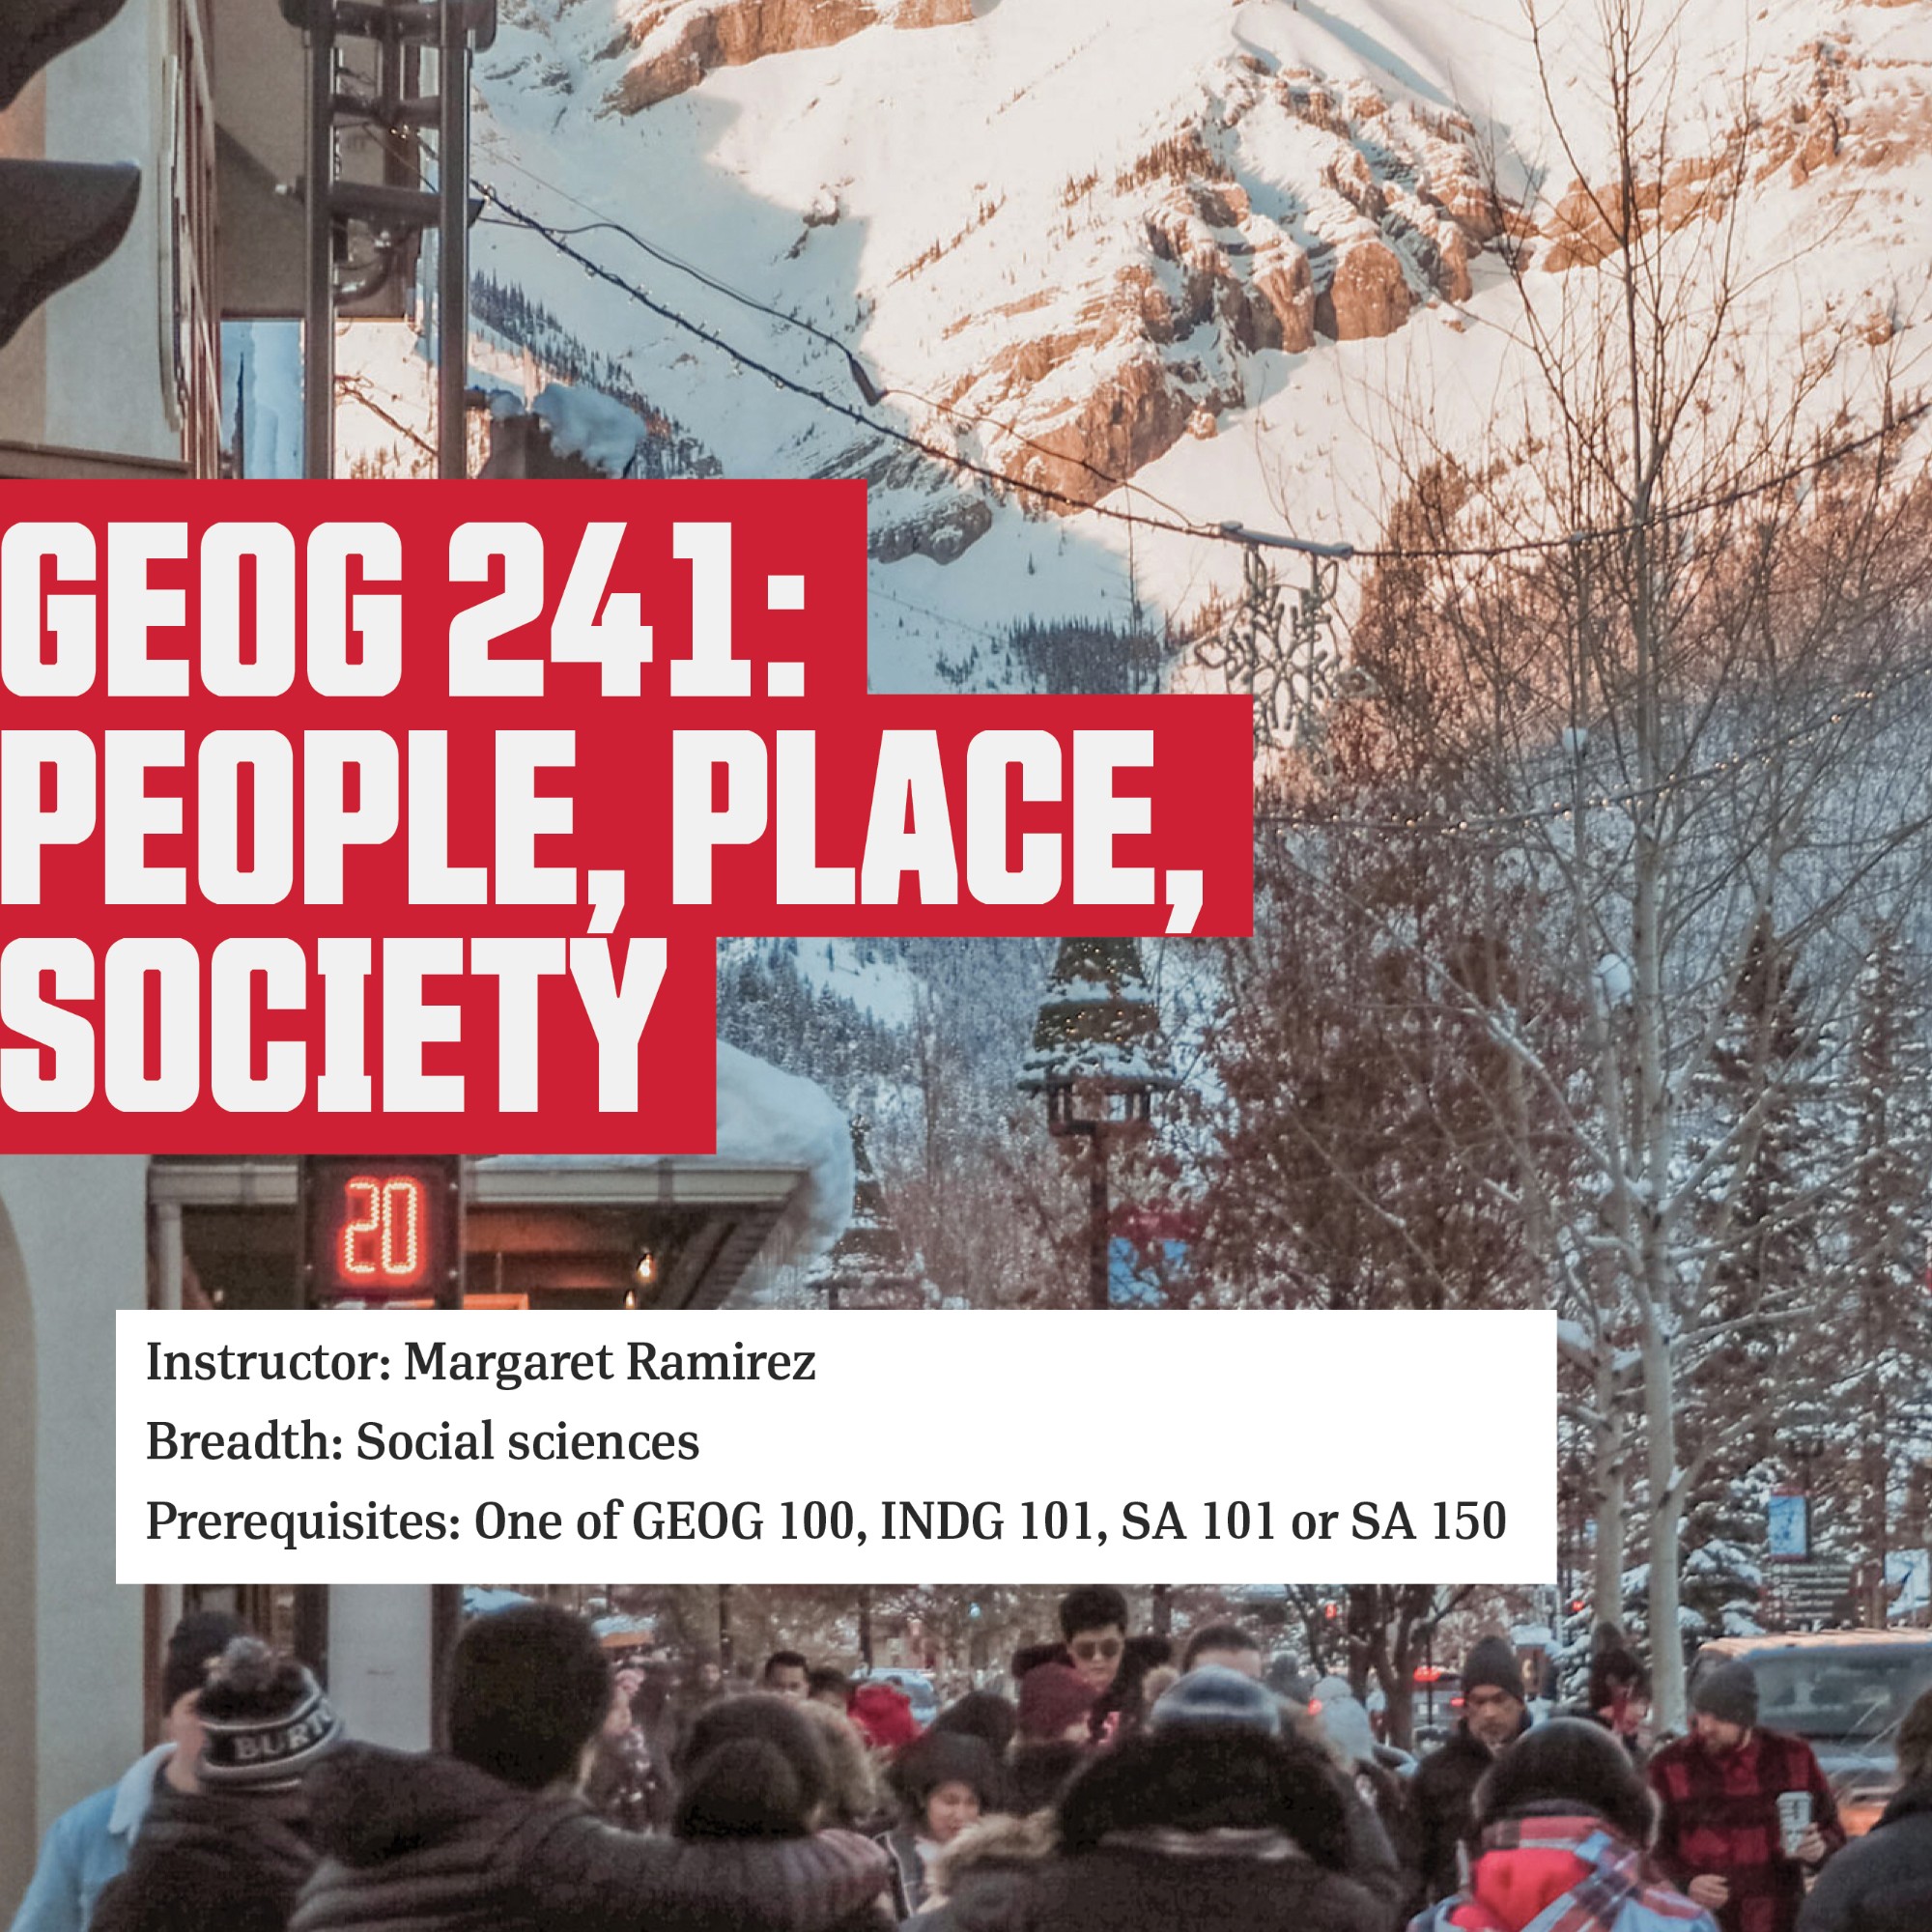 GEOG 241: People, place, society